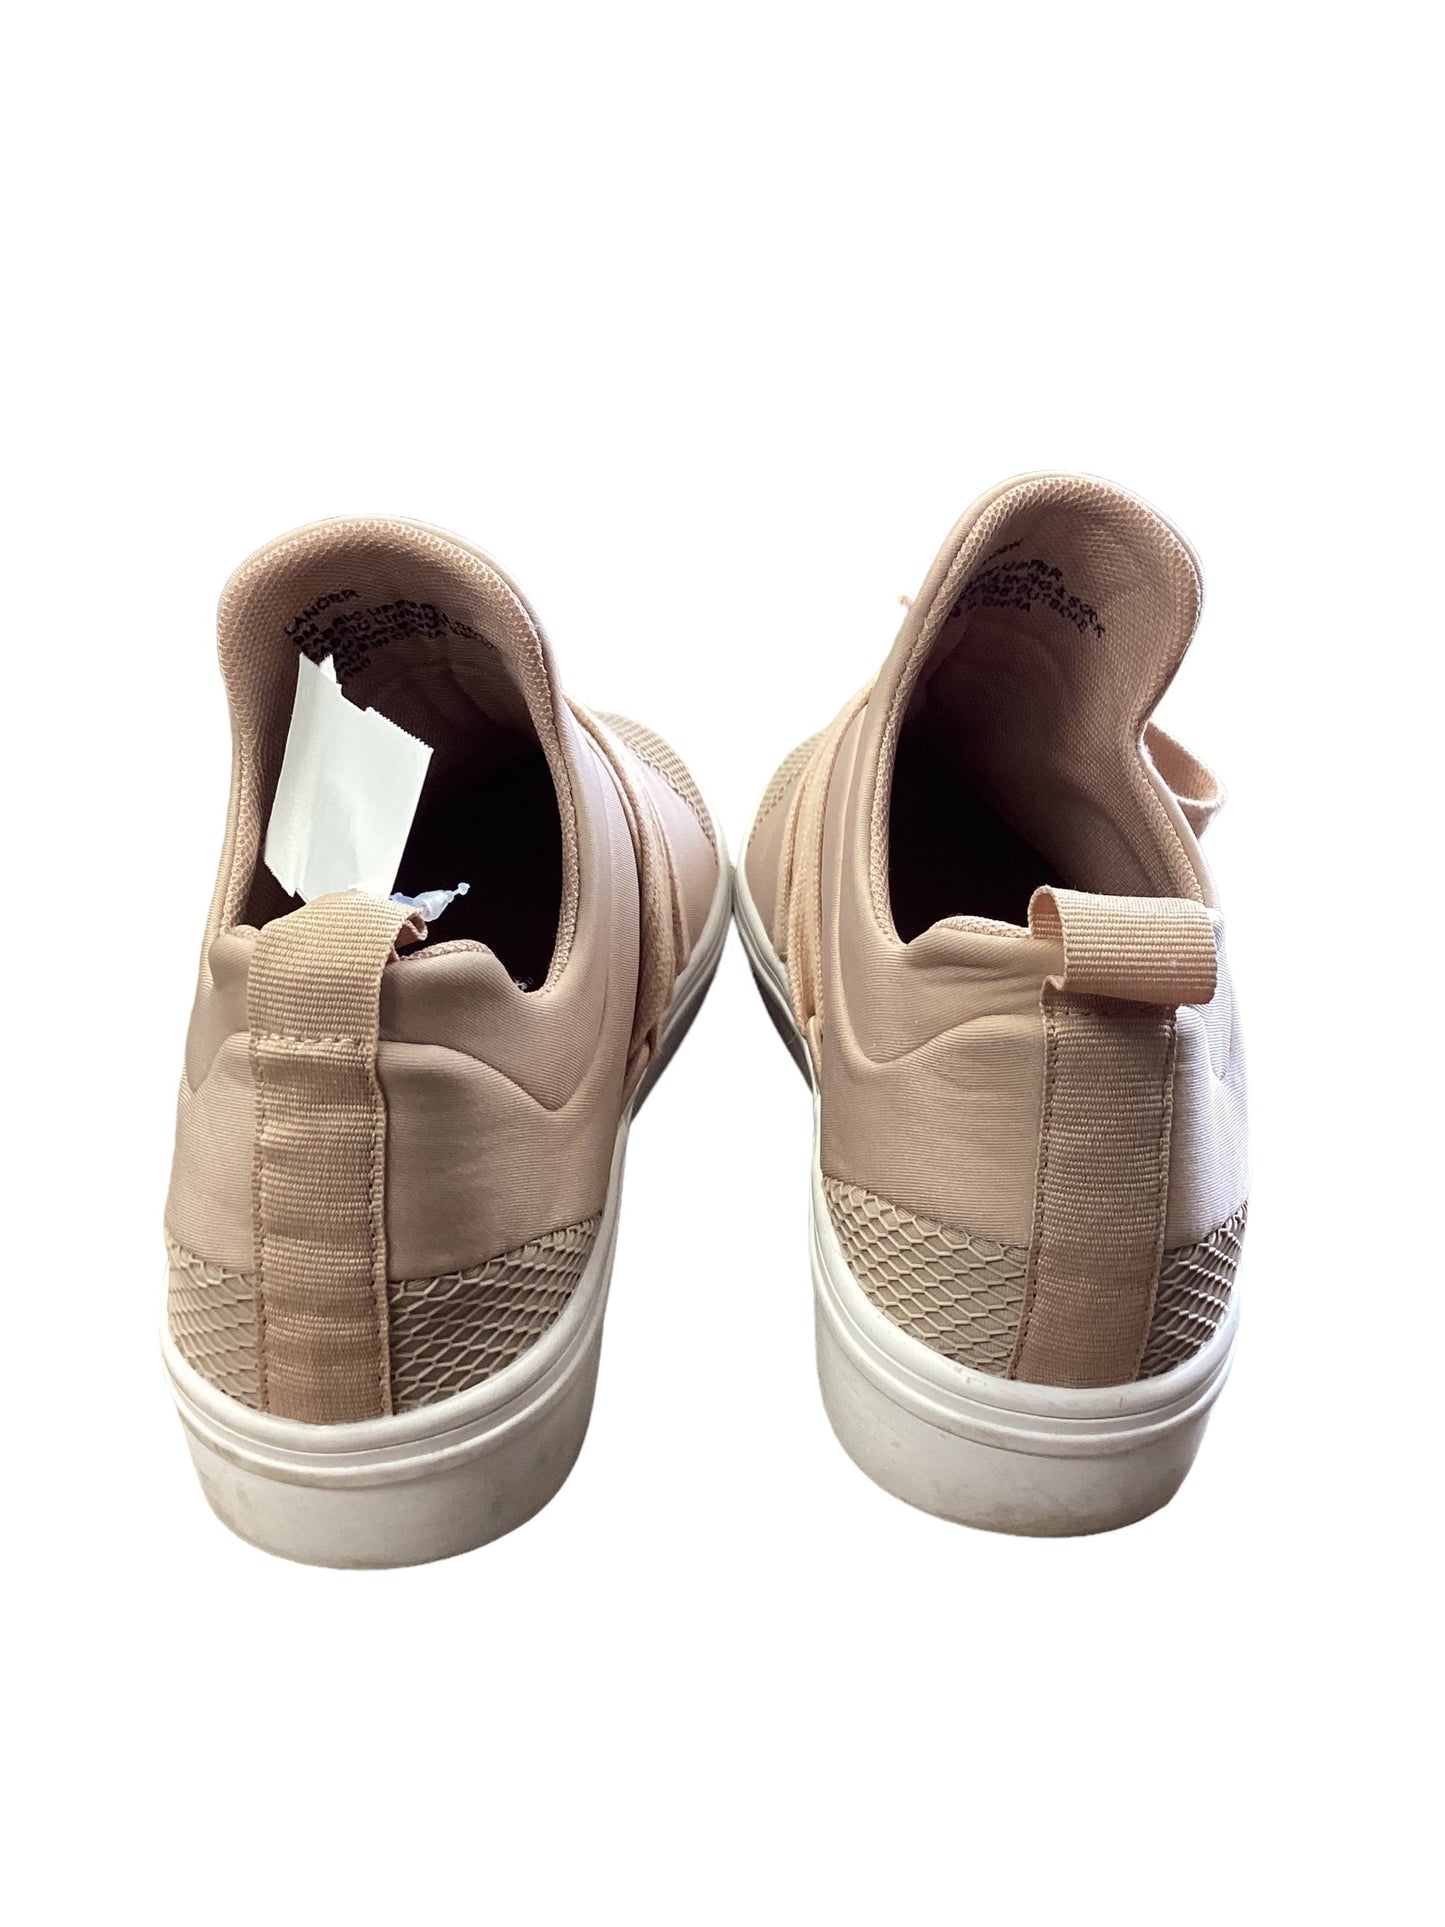 Tan Shoes Sneakers Steve Madden, Size 9